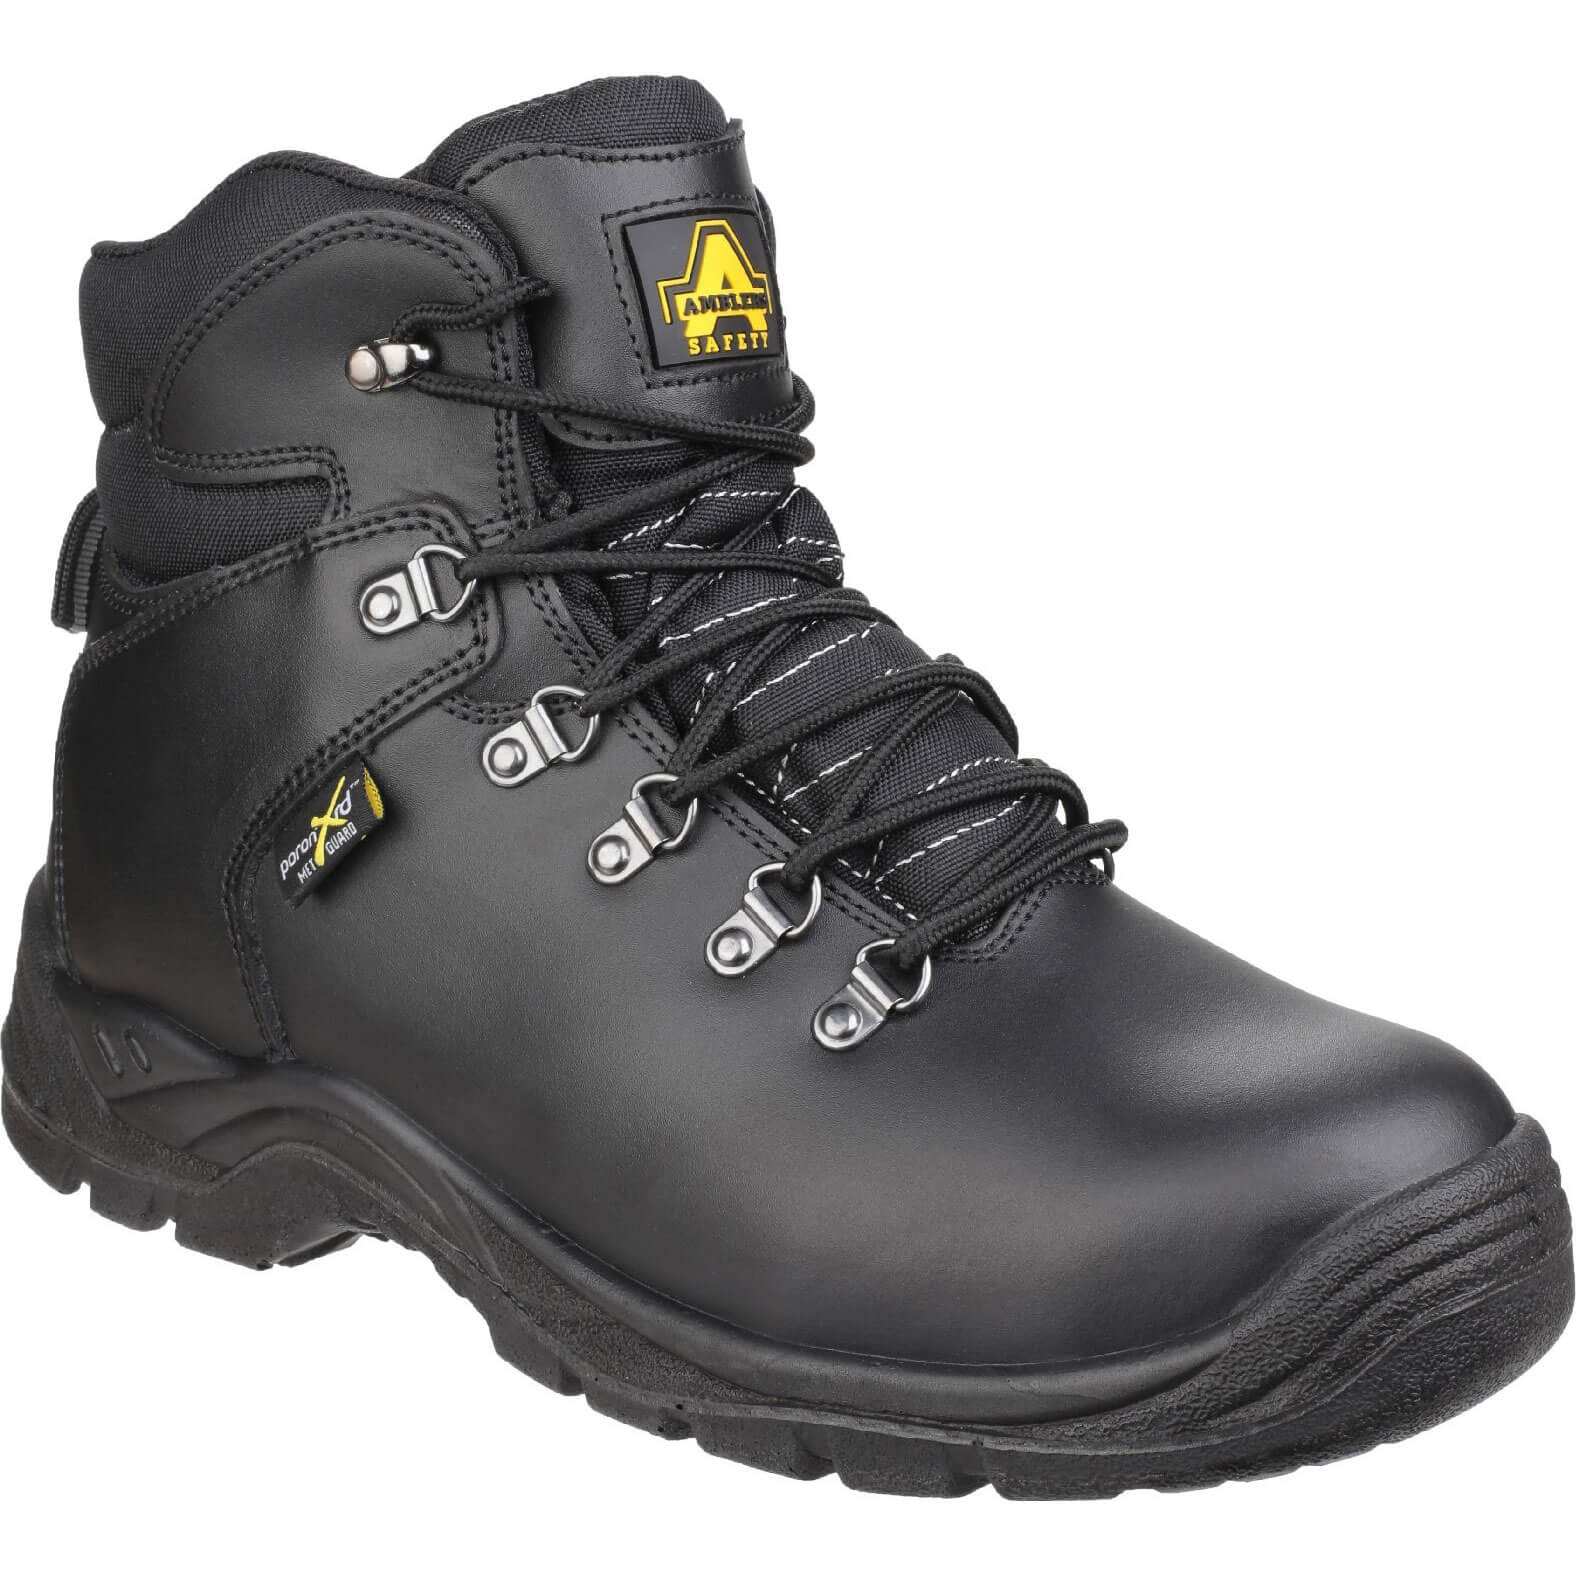 Image of Amblers Mens Safety As335 Poron Xrd Internal Metatarsal Safety Boots Black Size 12